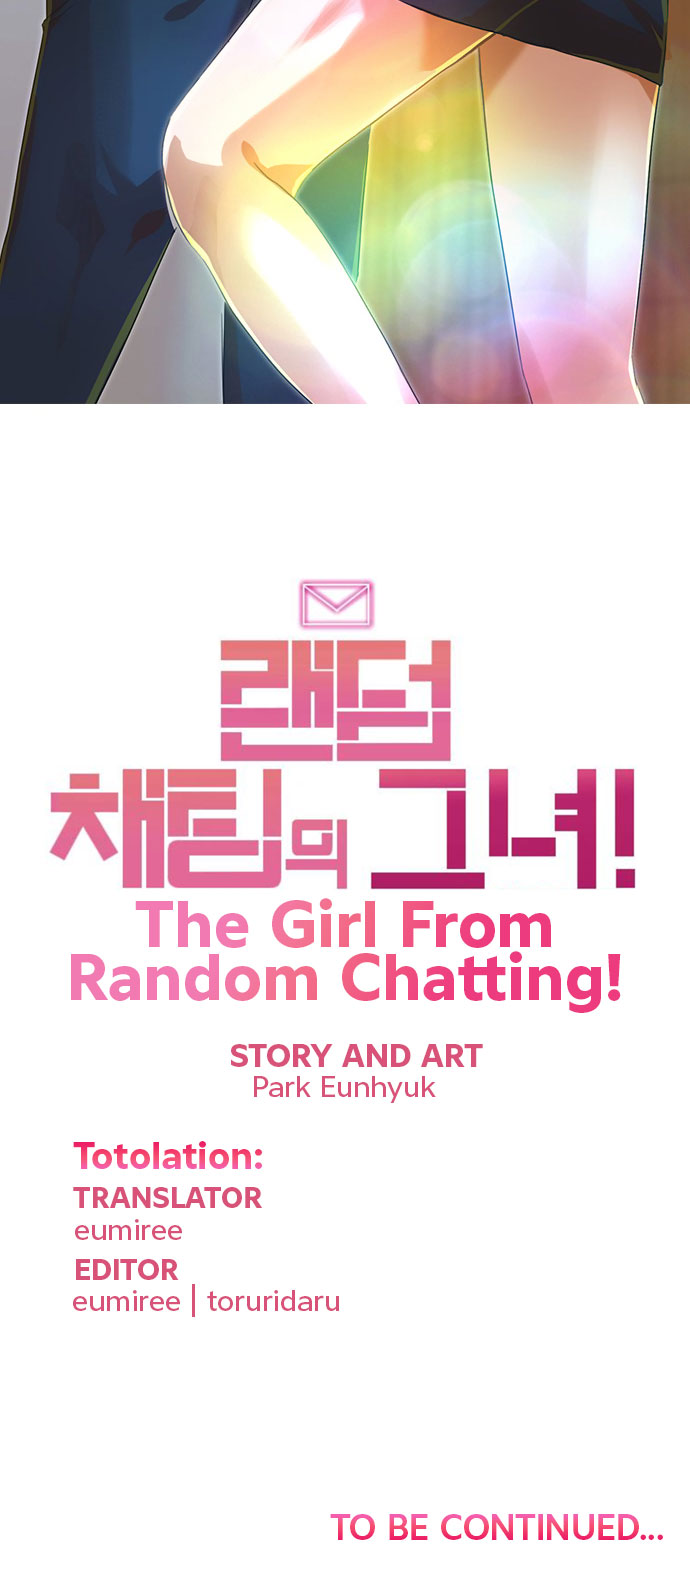 The Girl from Random Chatting! image